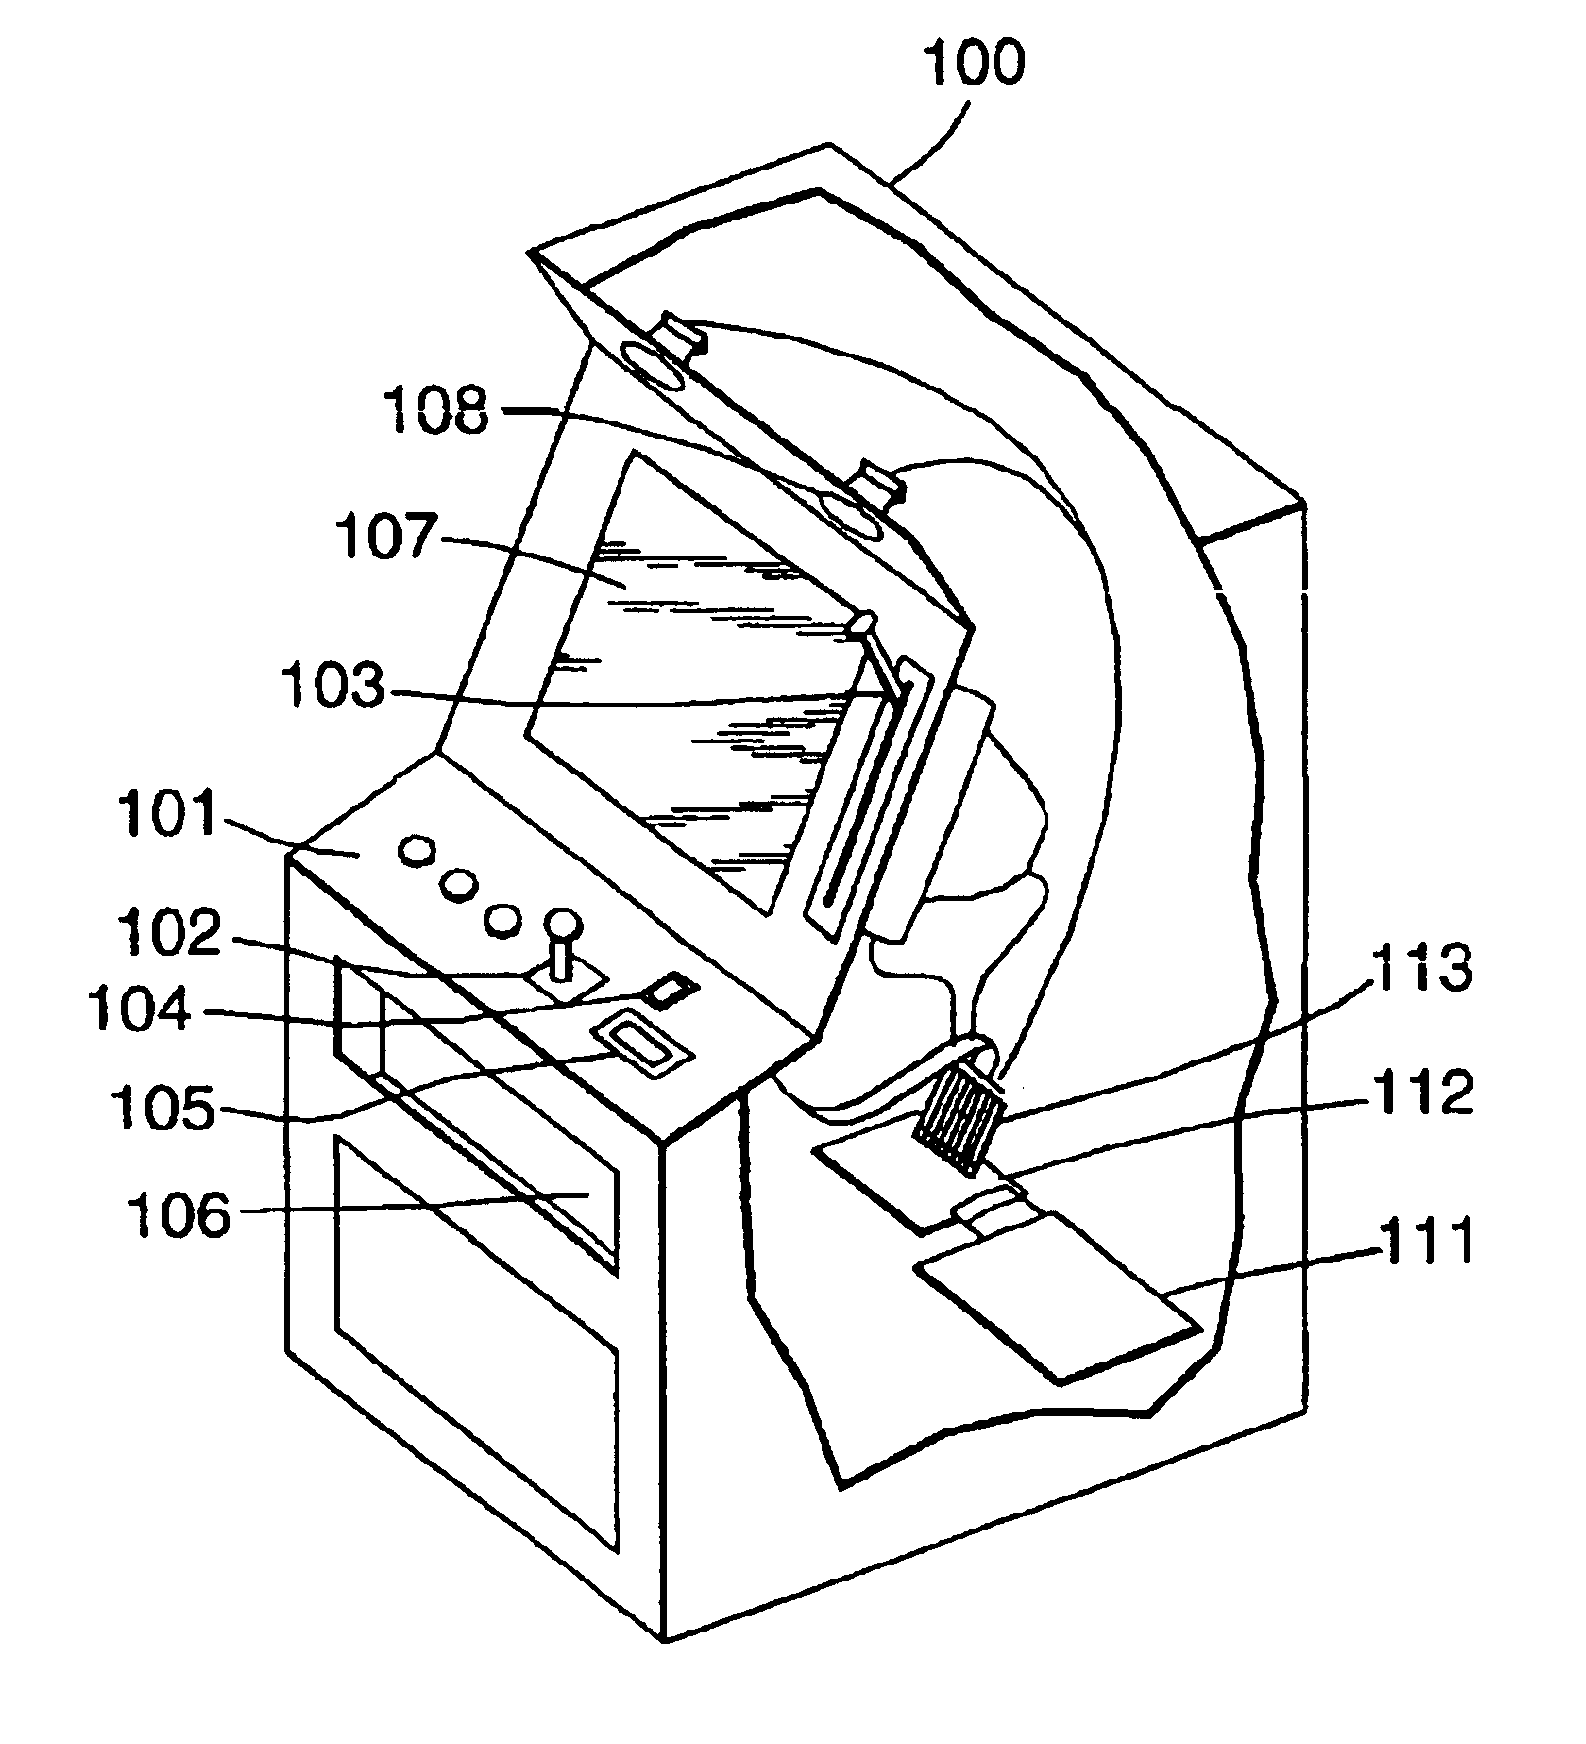 Authentication in a secure computerized gaming system